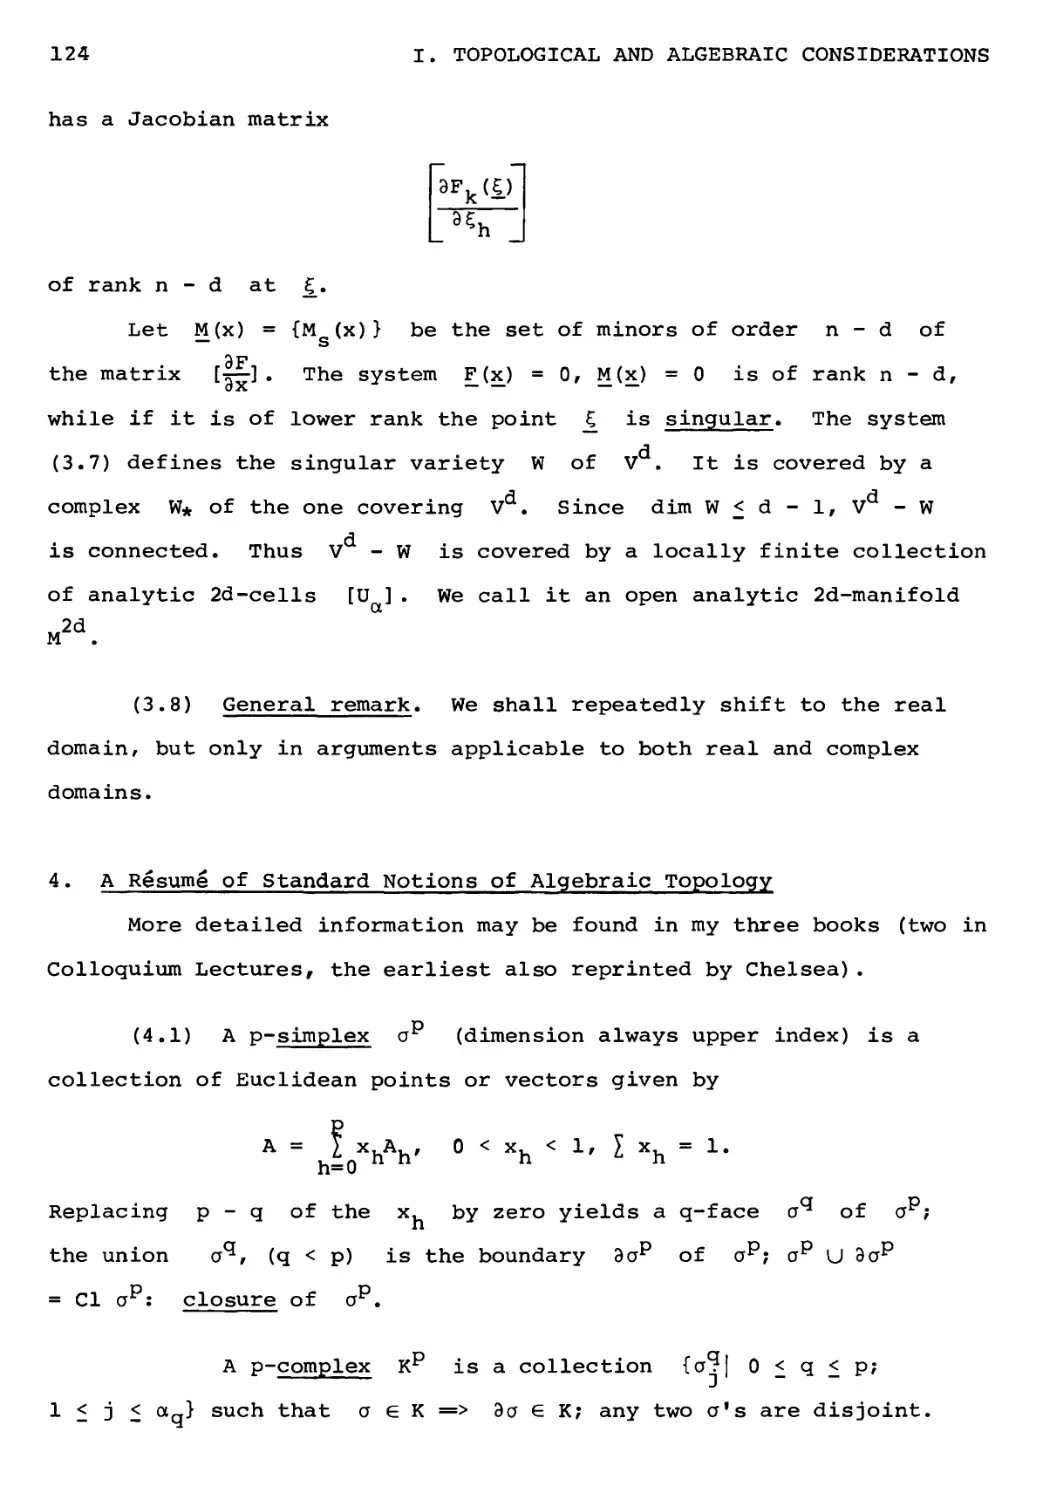 4. A Resume of Standard Notions of Algebraic Topology